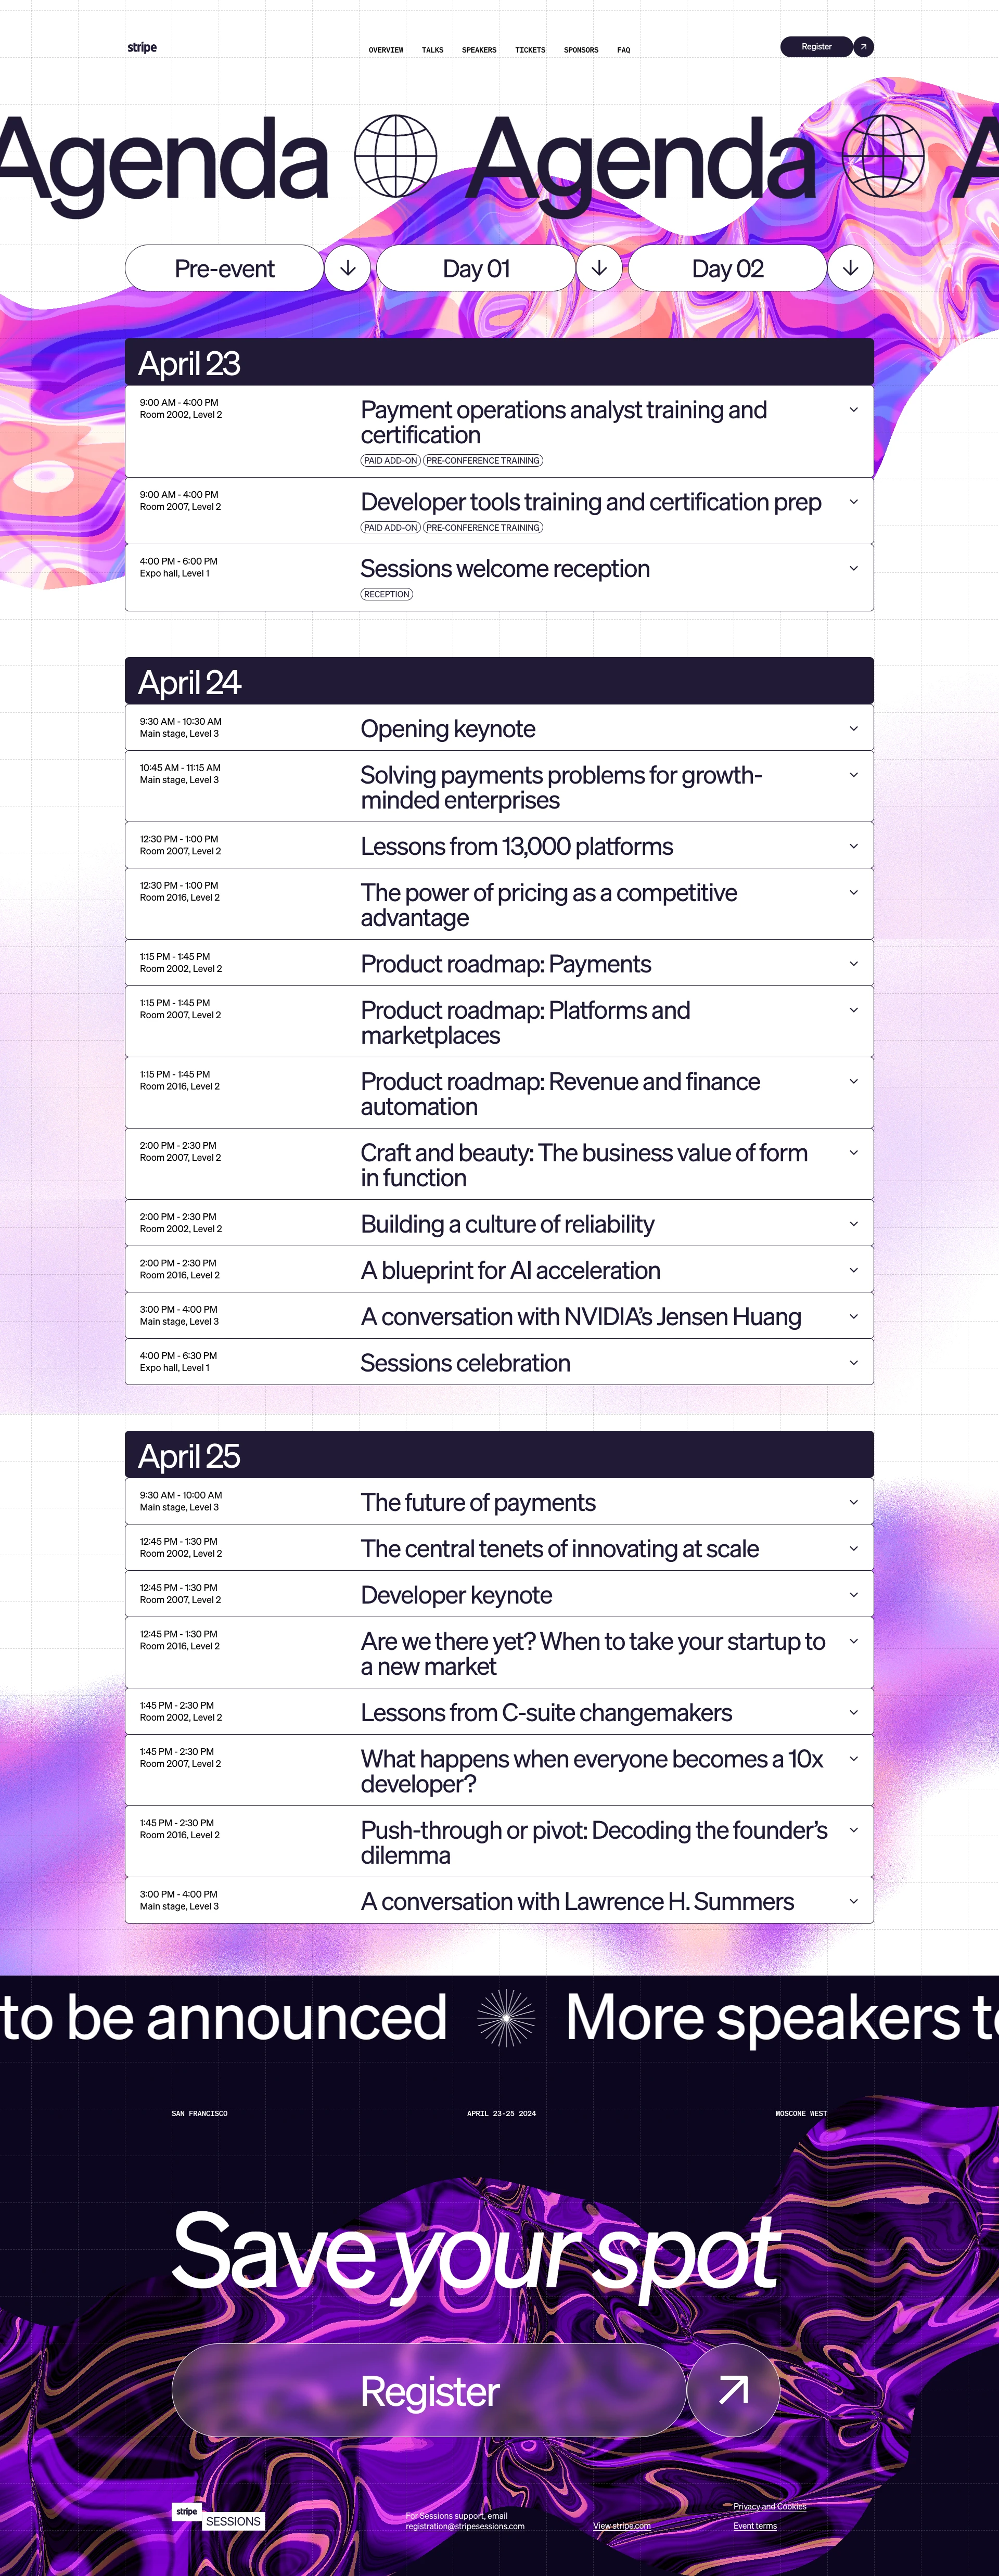 Stripe Sessions 2024 Landing Page Example: Stripe Sessions is a 2.5-day, in-person event with discussions about Stripe product updates, important internet economy trends, the future of payments and more.